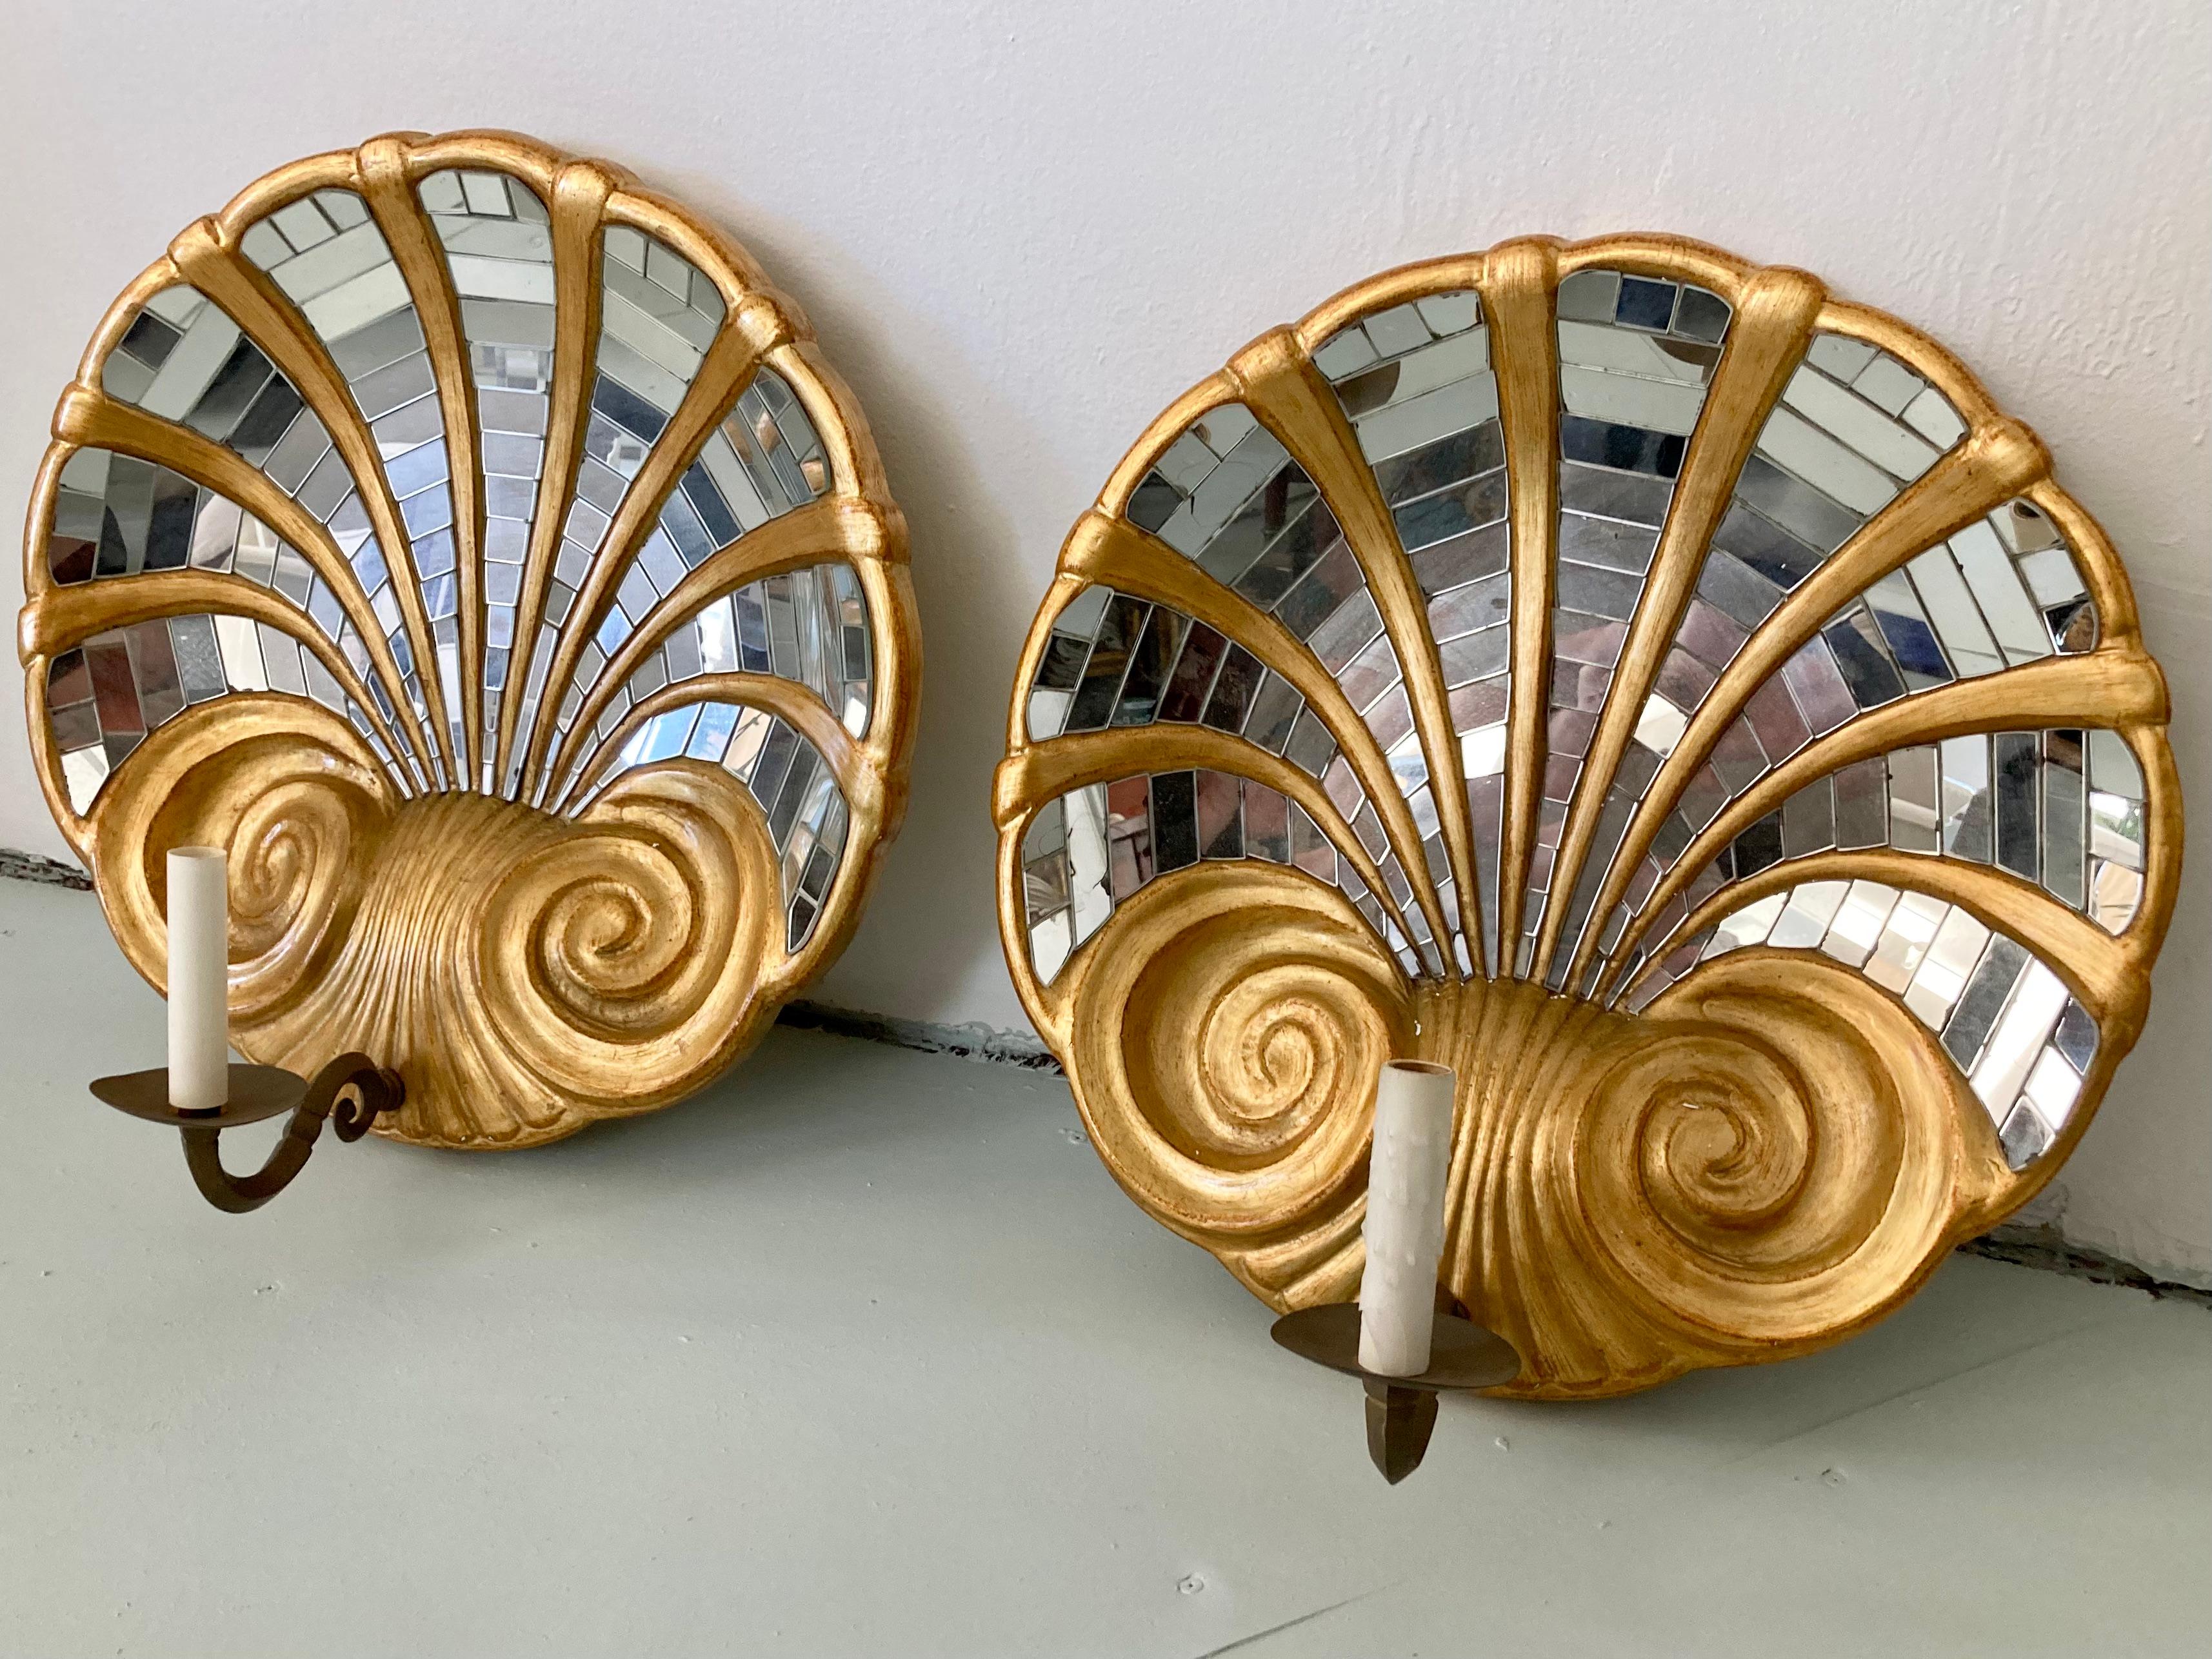 French Serge Roche Wall Sconces, a Pair